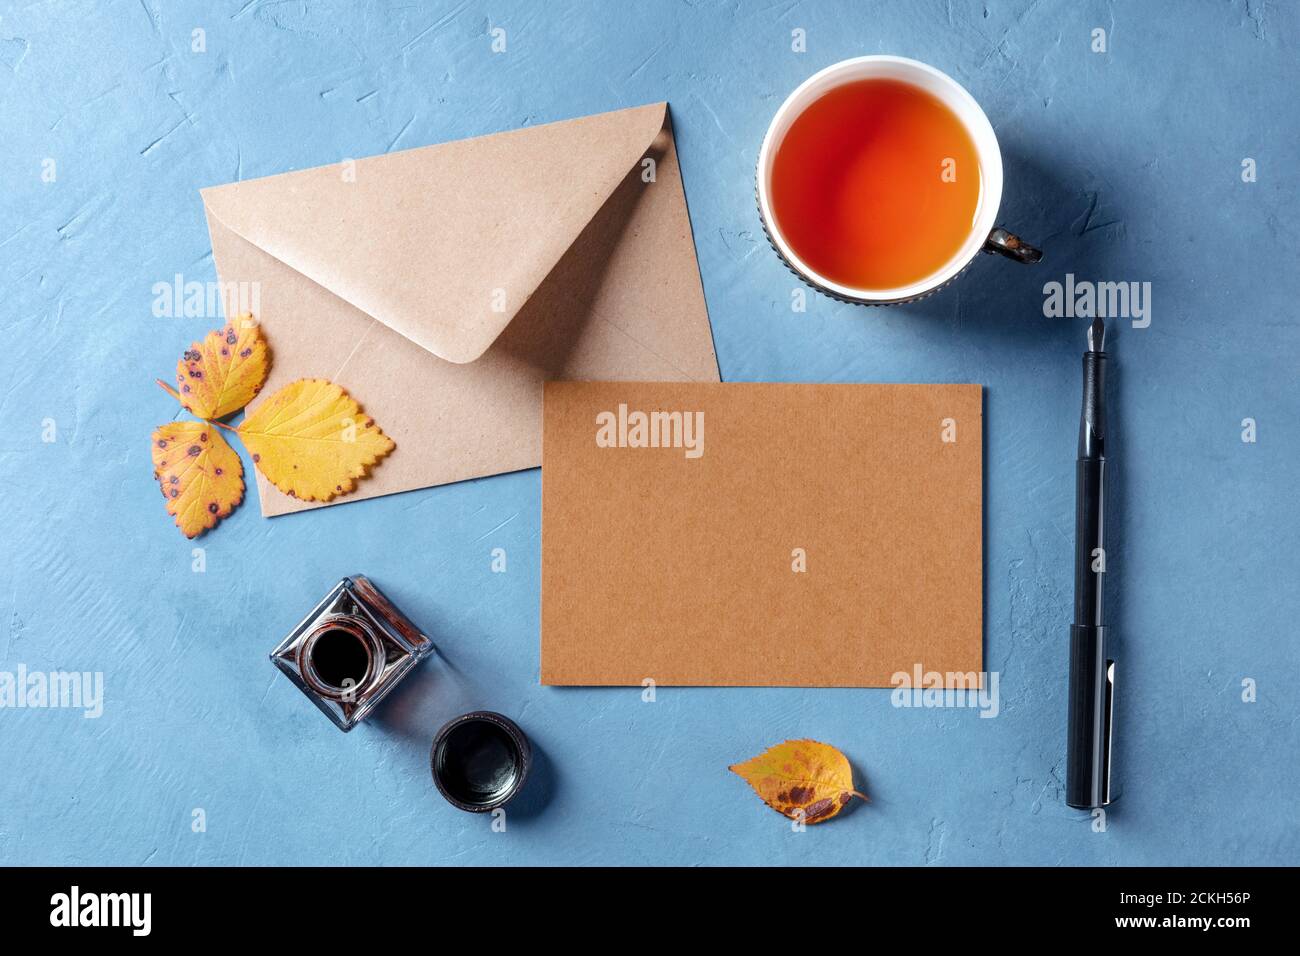 Autumn stationery mockup, a brown craft a5 card with an envelope, shot from the top with a cup of tea and ink pen, a flat lay Stock Photo